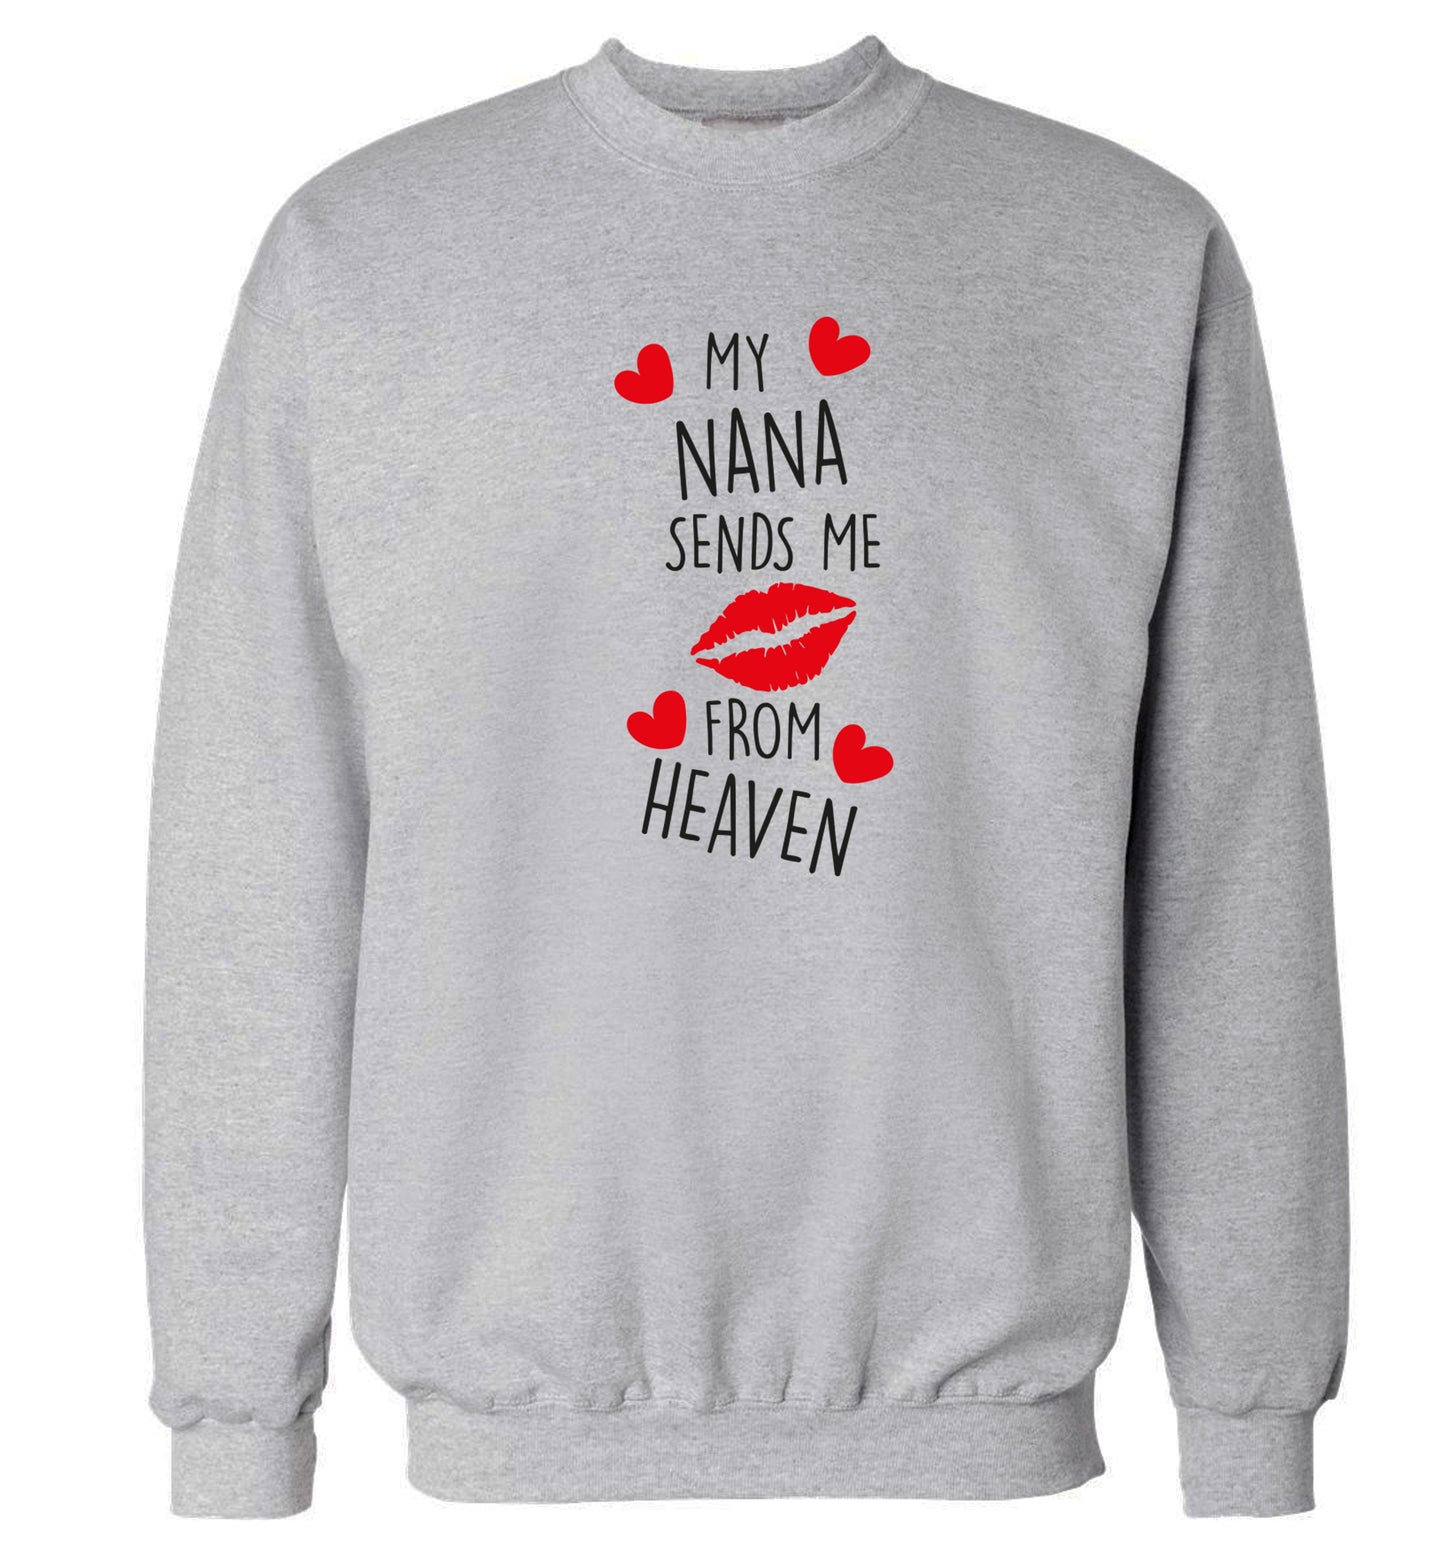 My nana sends me kisses from heaven Adult's unisex grey Sweater 2XL